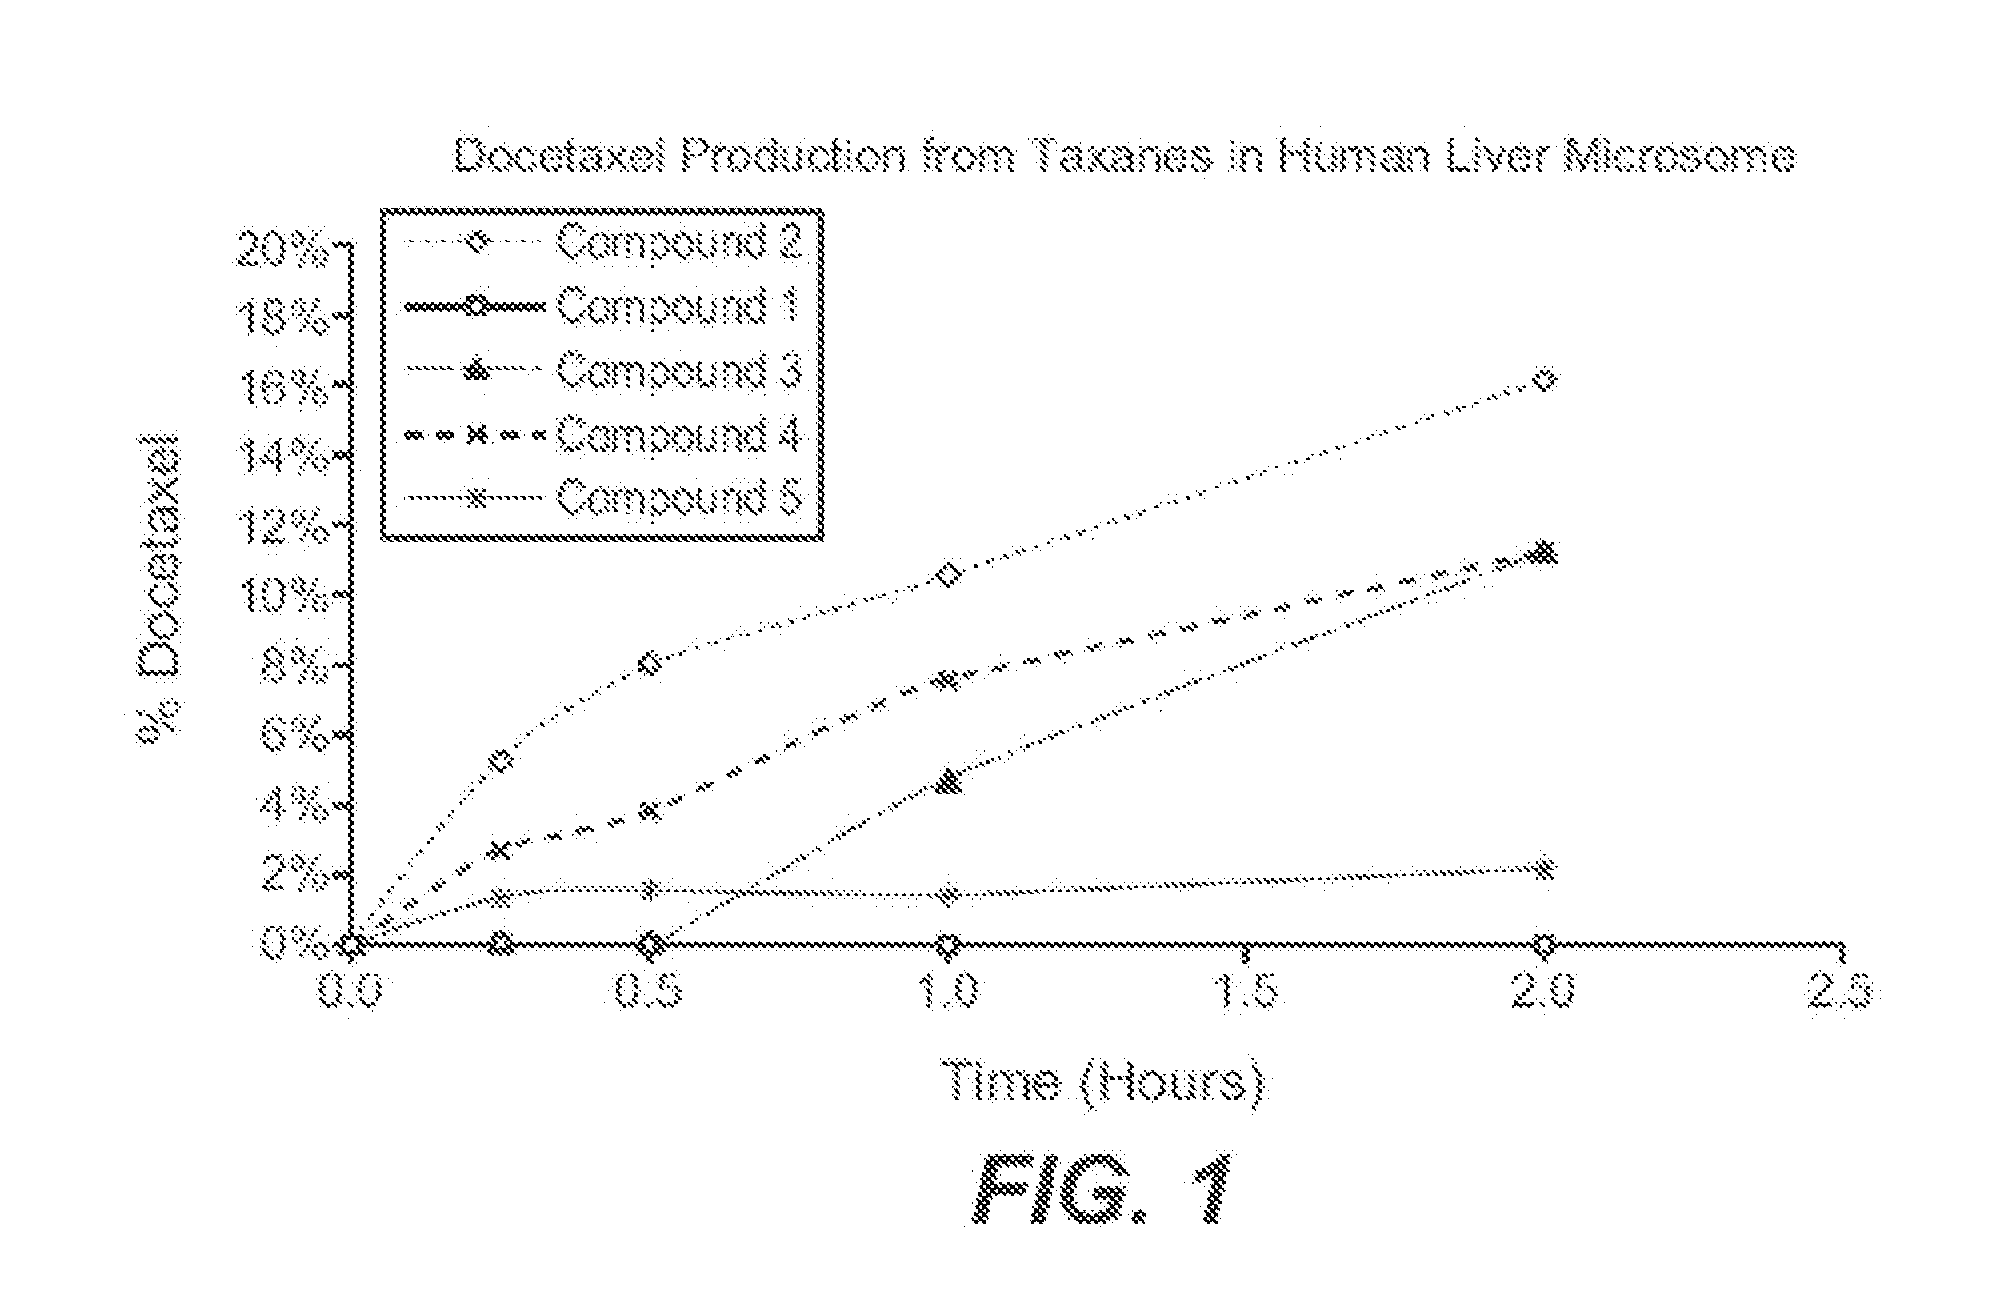 Nanoparticle formulations and uses therof